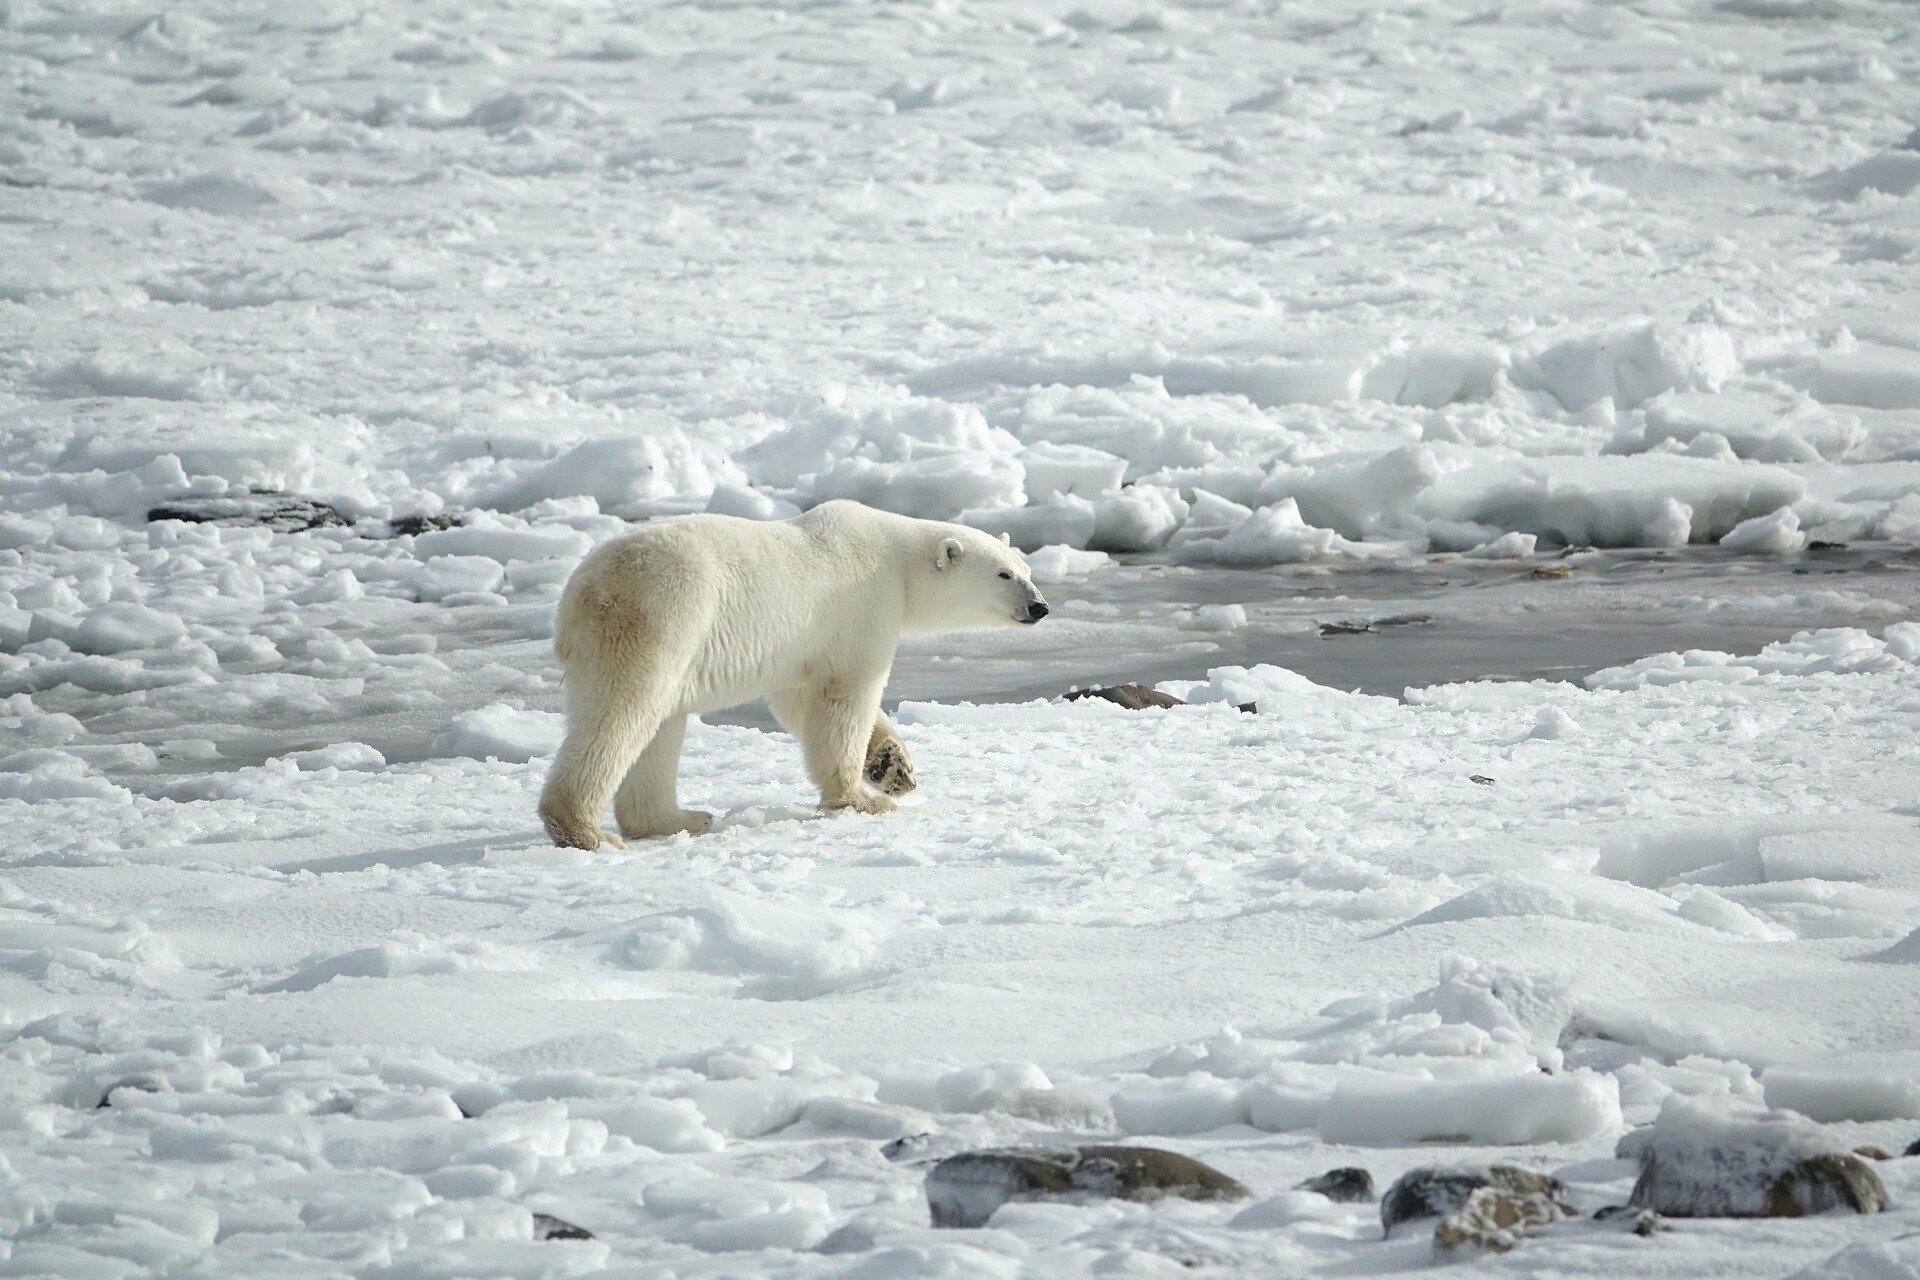 For threatened polar bears, the climate change diet is a losing proposition  - NNSL Media